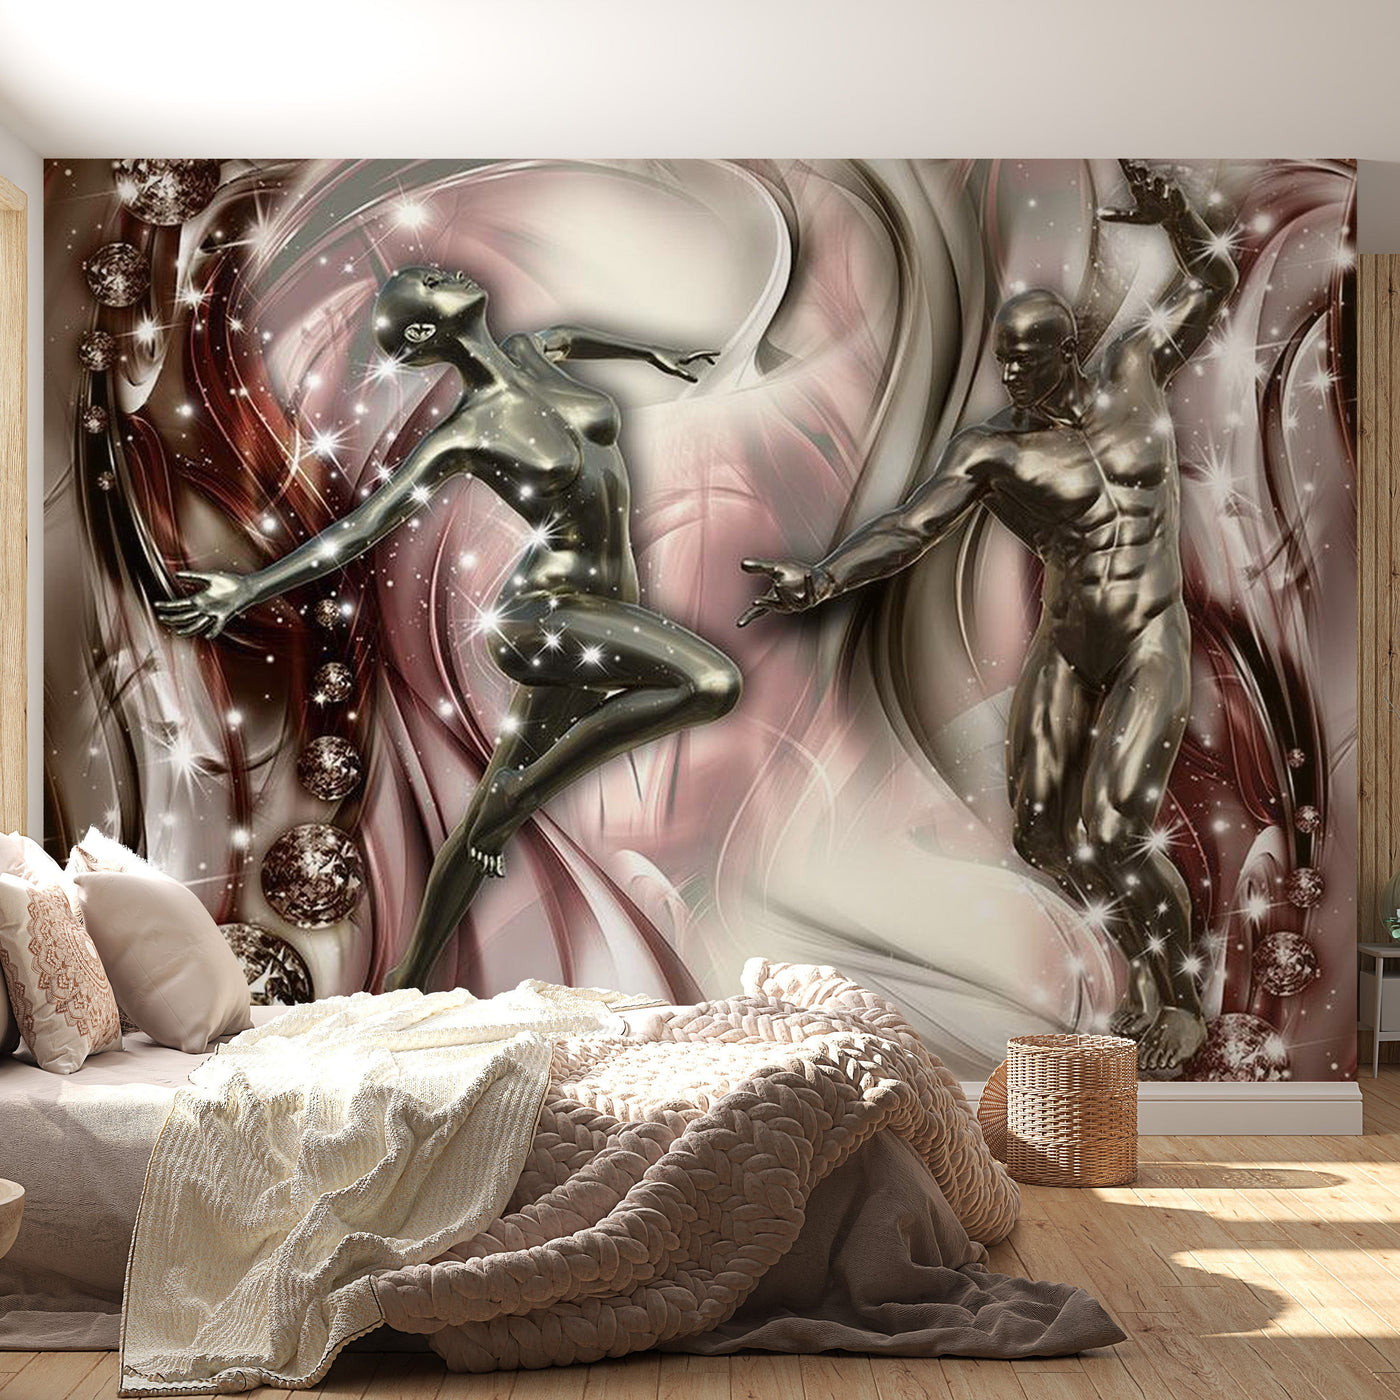 Peel & Stick Glam Wall Mural - Dance Of Passion - Removable Wall Decals